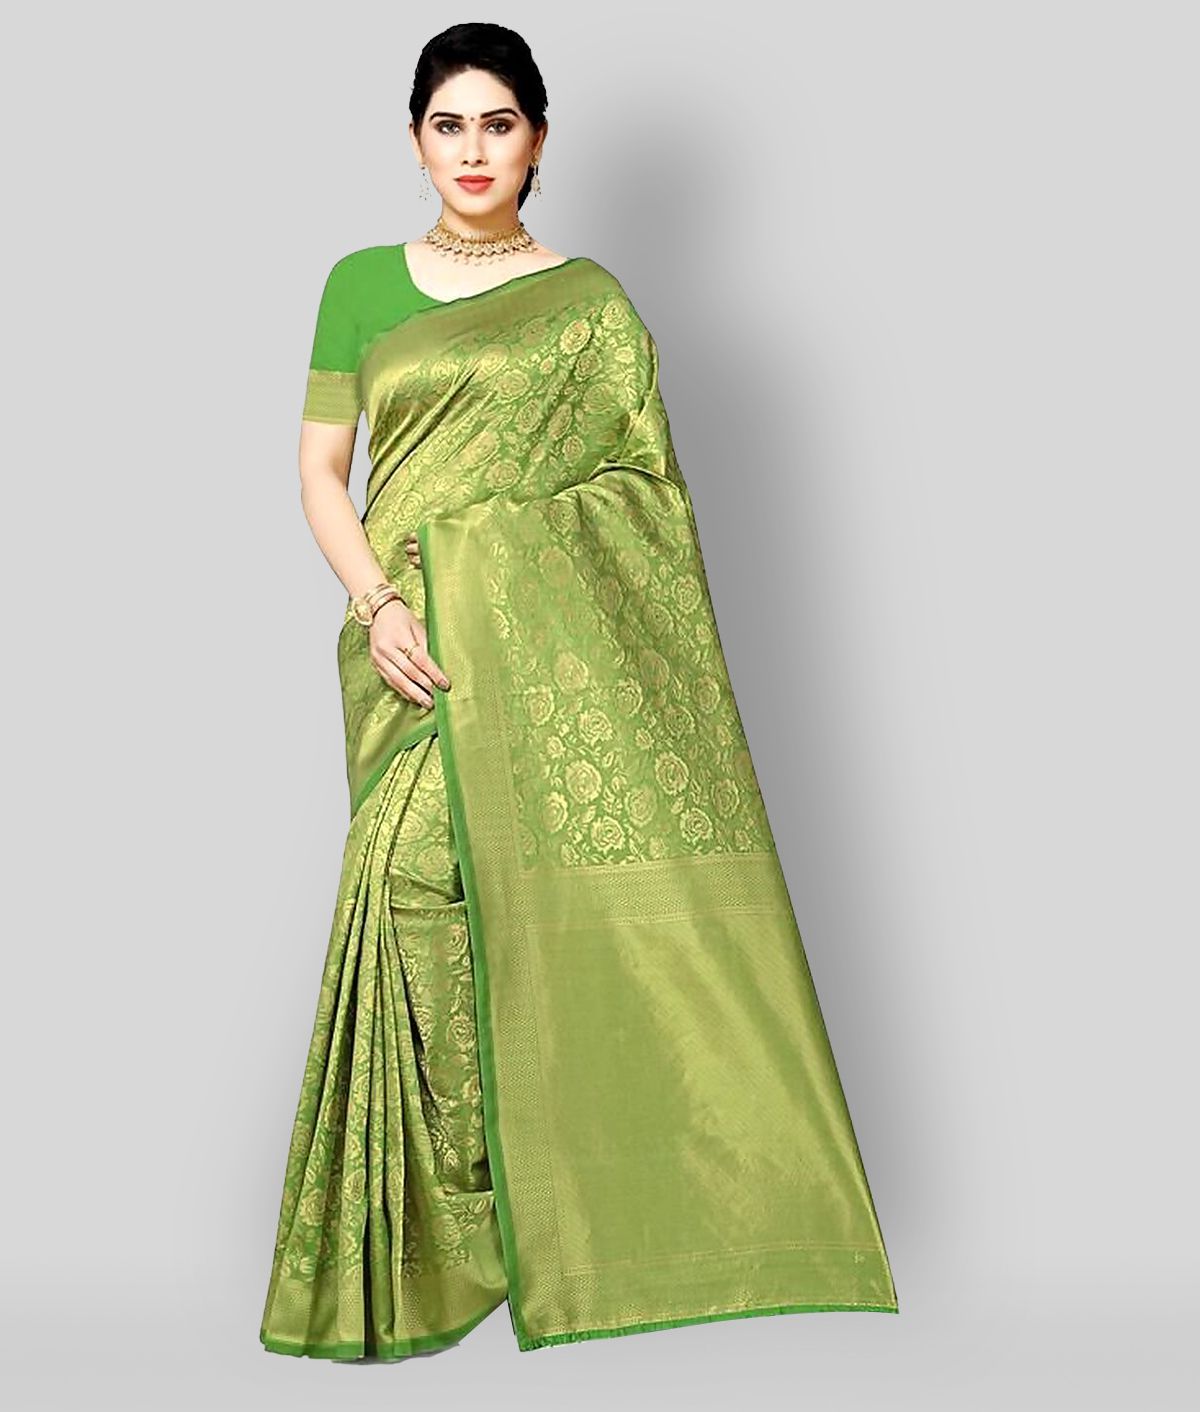 NENCY FASHION - Green Silk Blend Saree With Blouse Piece (Pack of 1)